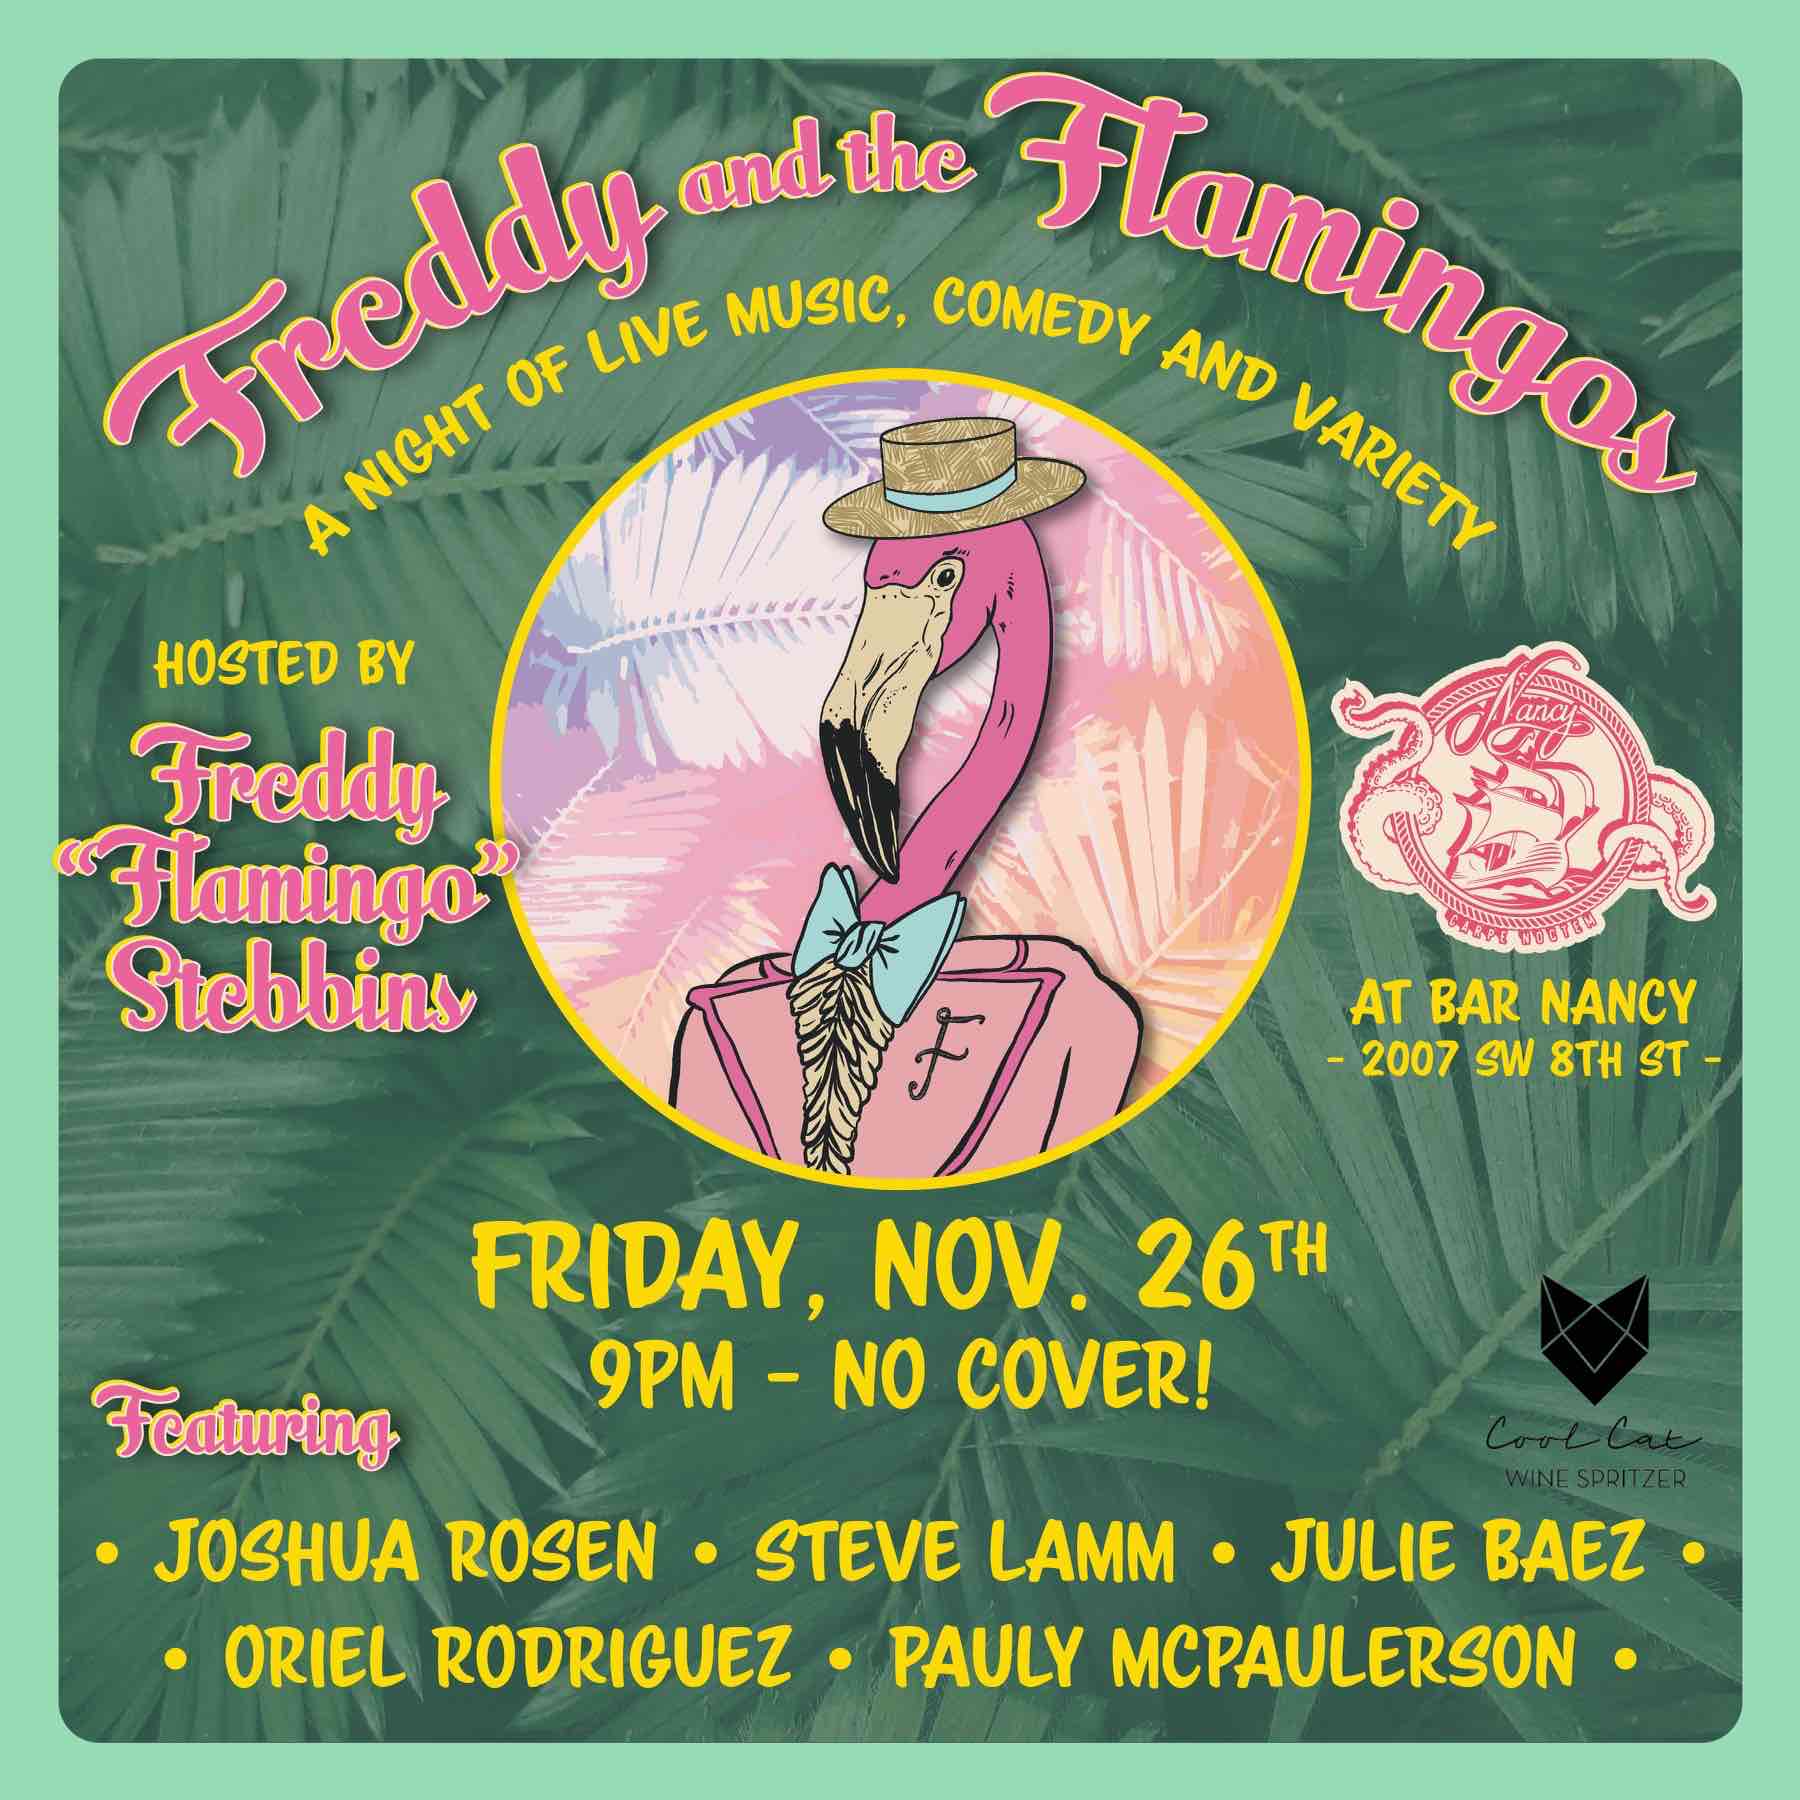 Freddy and the Flamingos presents: A Night of Live Music, Comedy and Variety at Bar Nancy